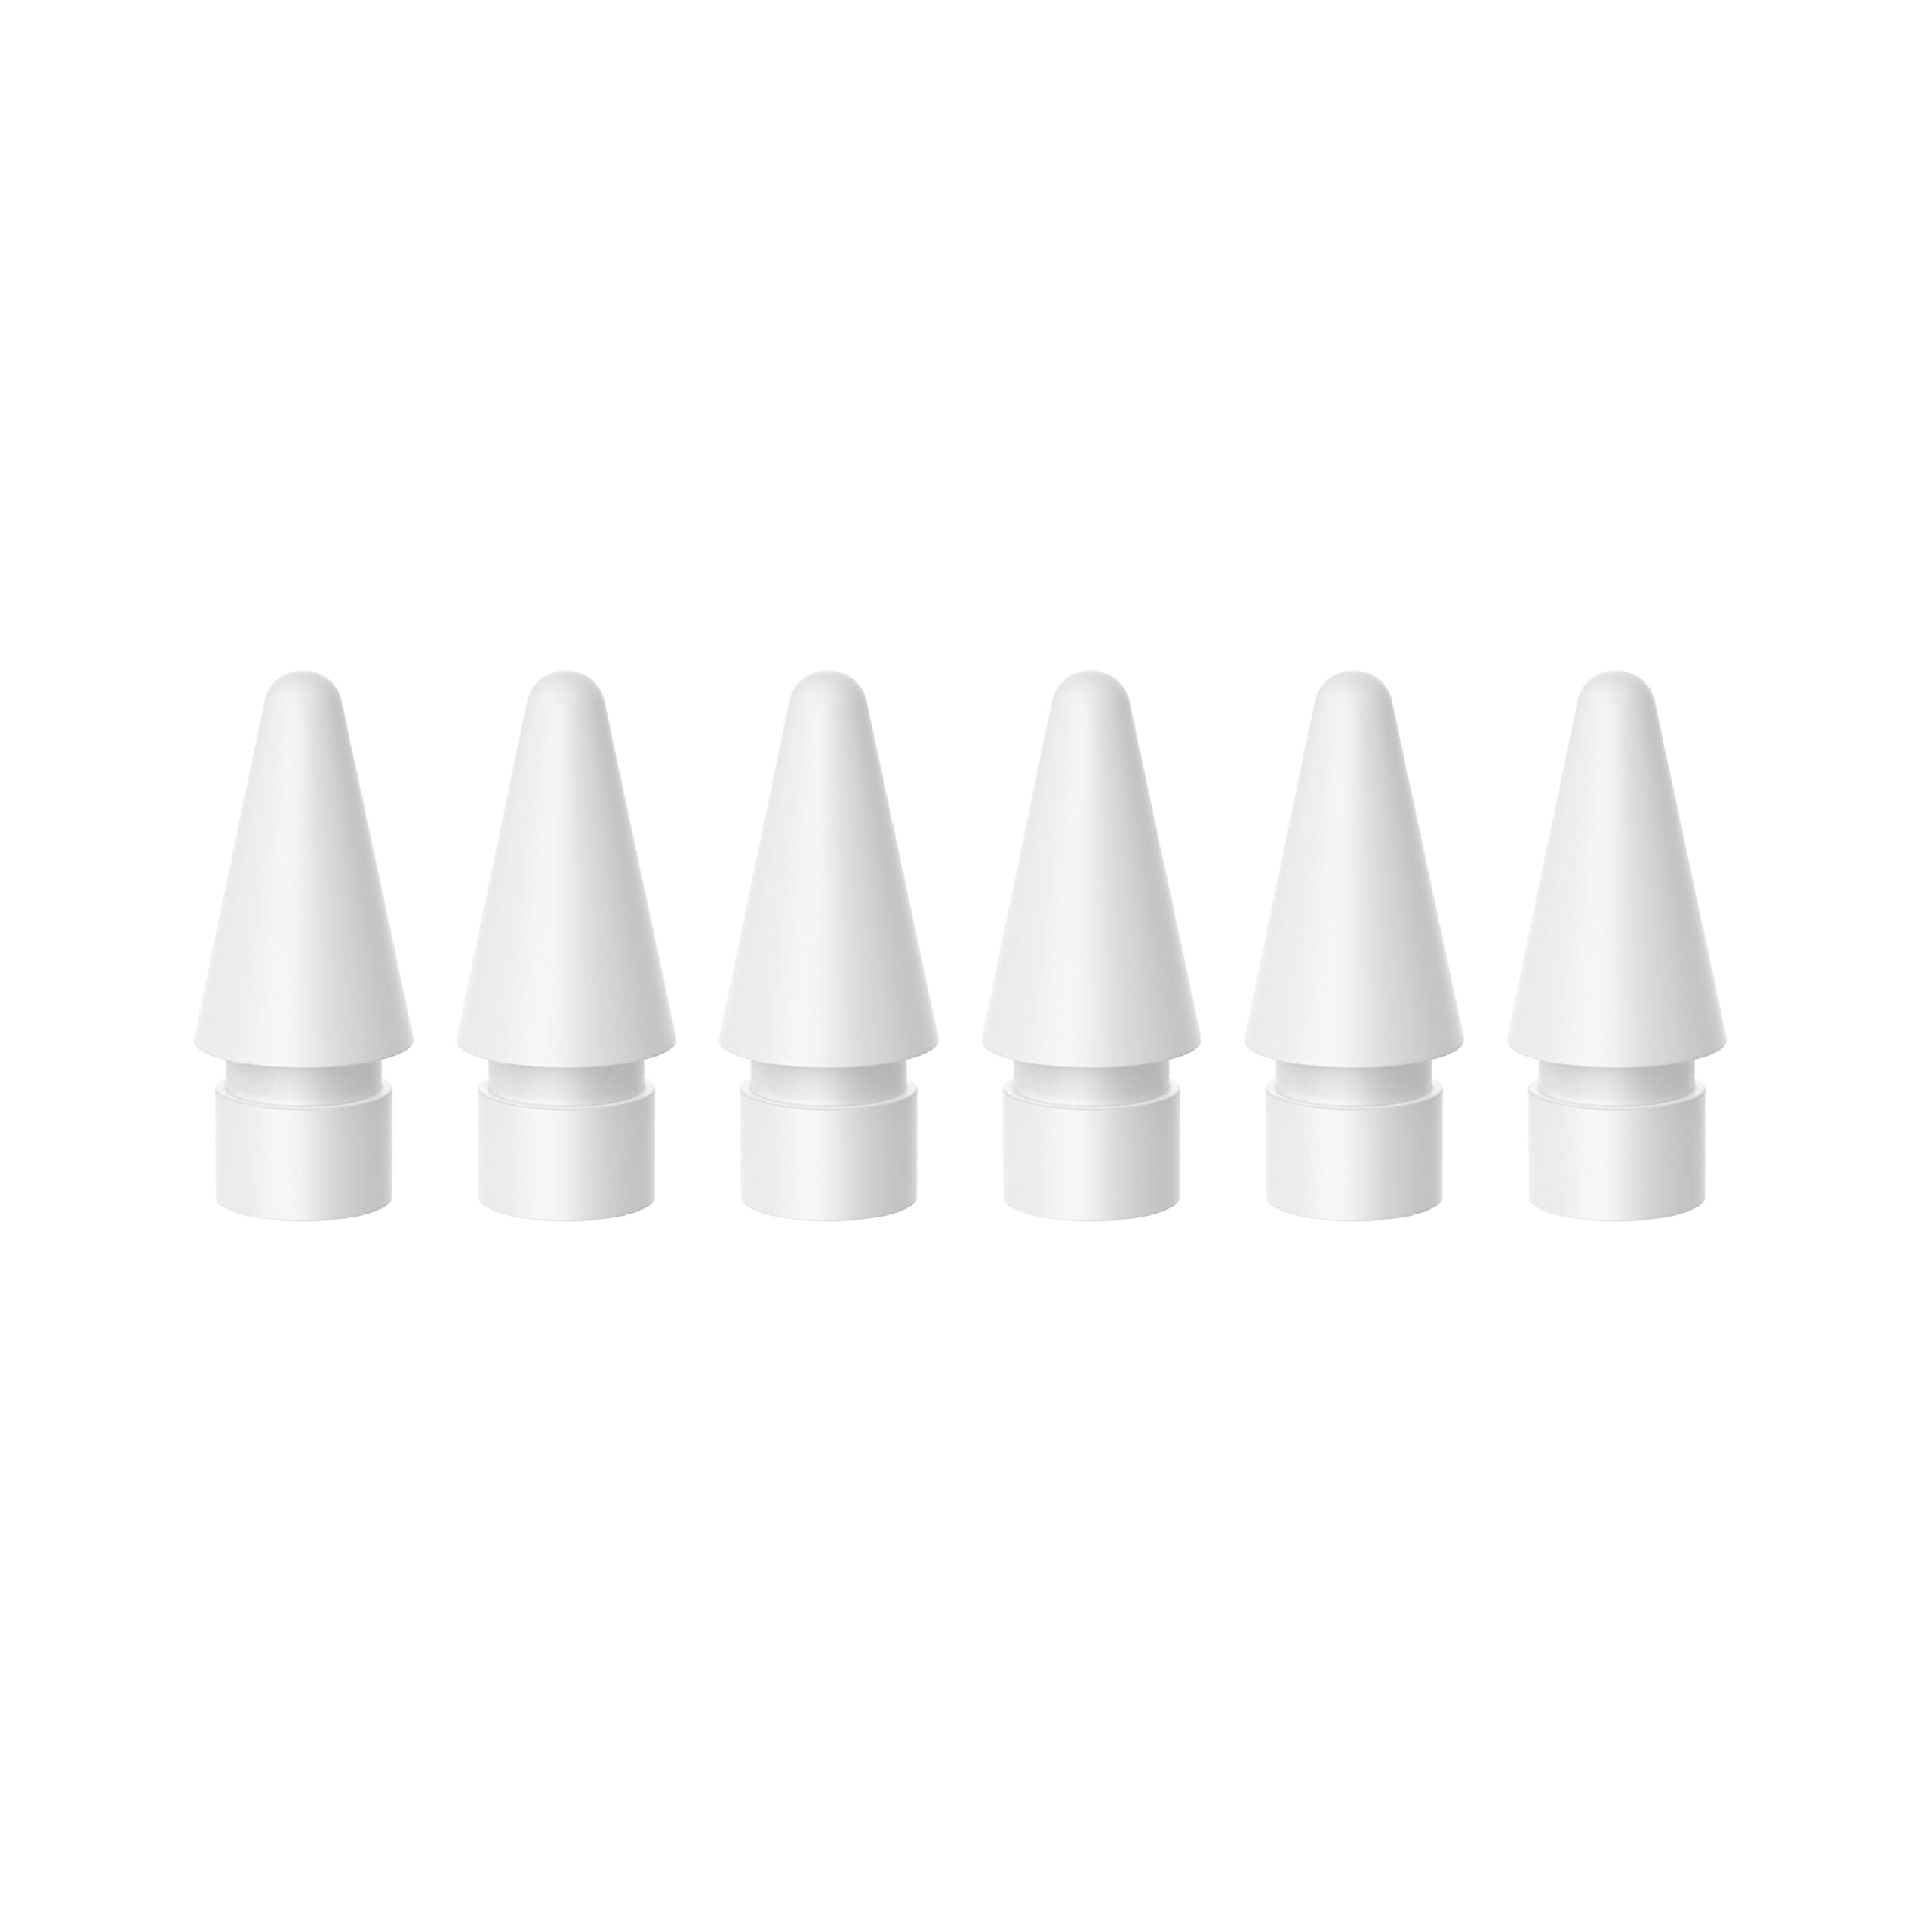 Blupebble Replacement Tips for Apple Pencil, Pack of 6 Compatible with Apple Pencil 1st Gen and 2nd Gen, No Wear Out Fine Point Precise Control Pen Like Nibs for Apple Pencil